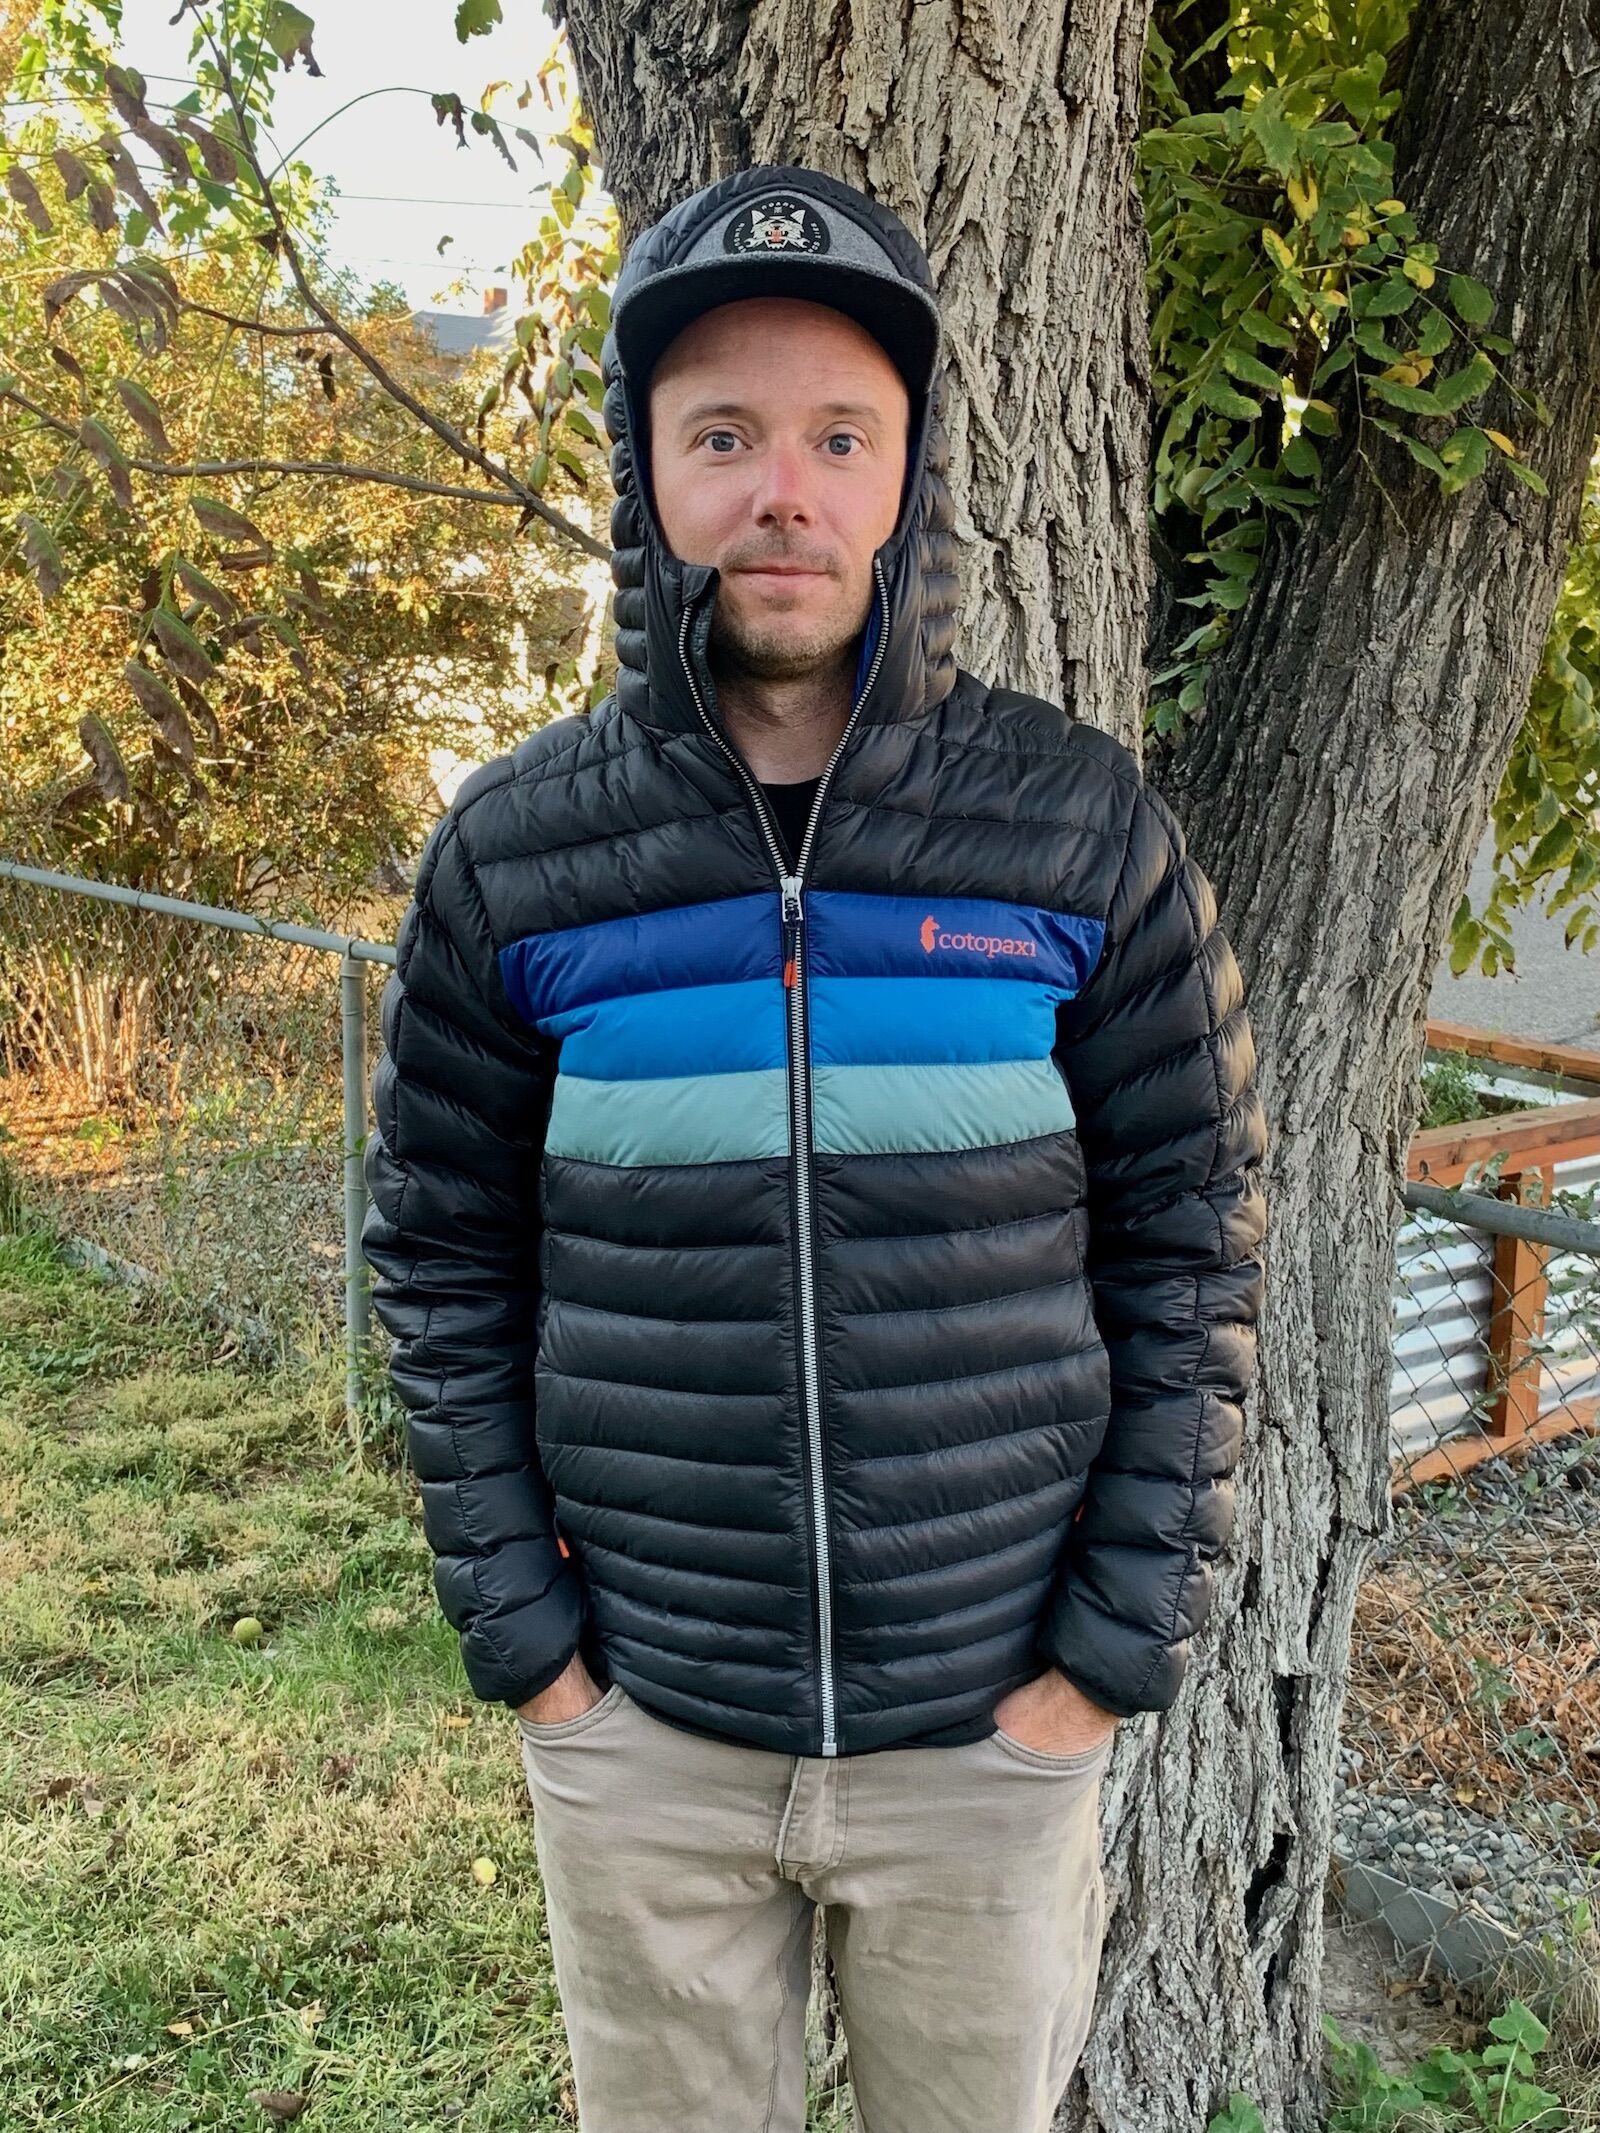 Cotopaxi Fuego Down Jacket Review: The Most Durable and Versatile Jacket